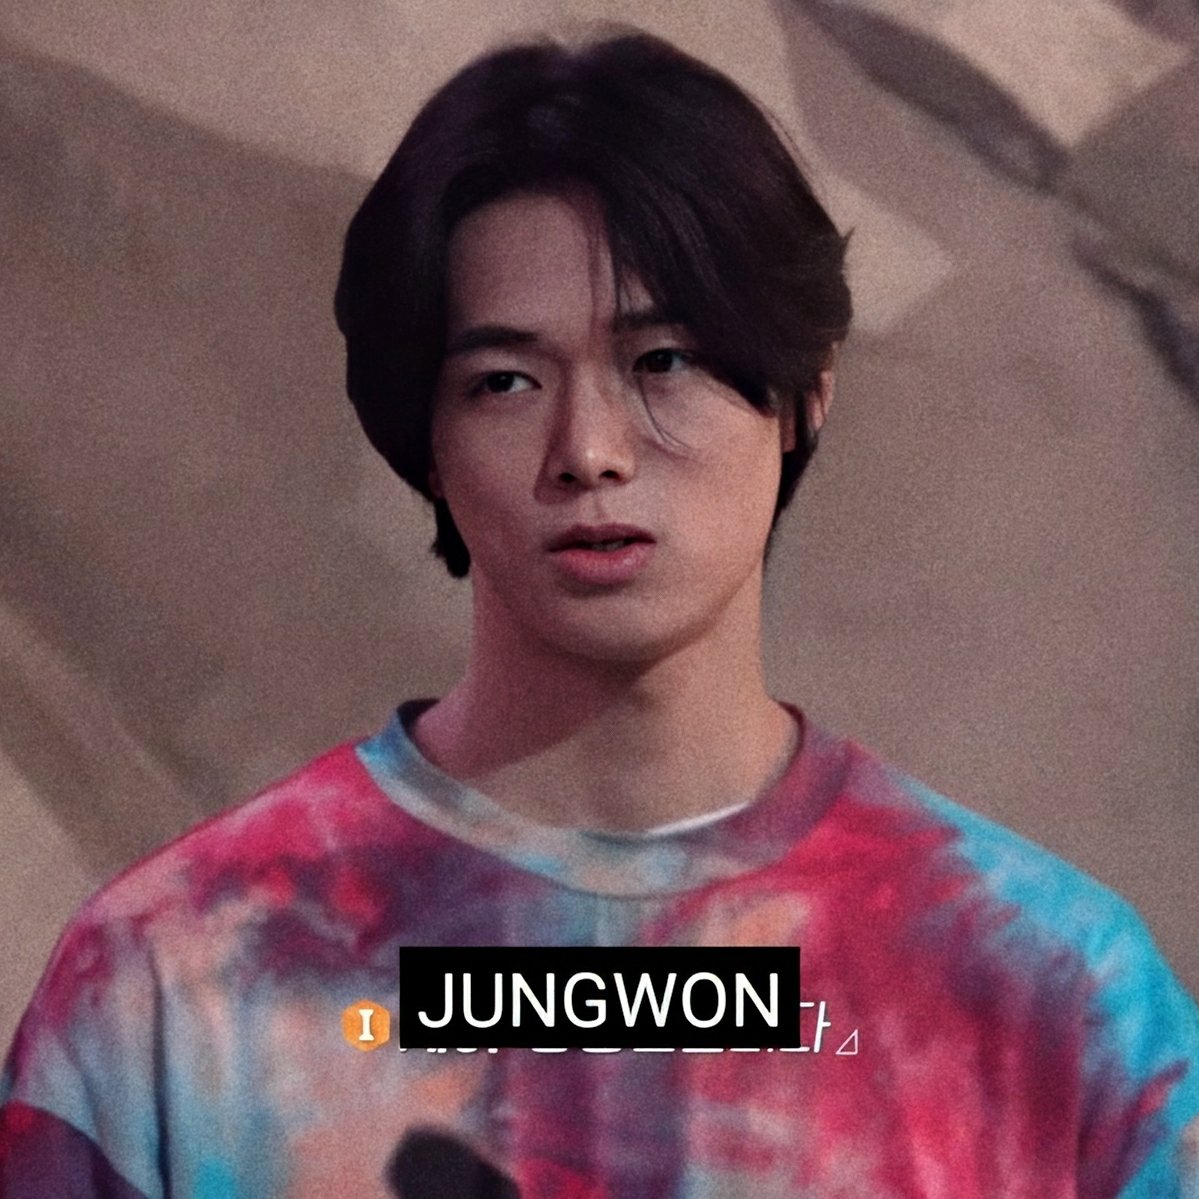 Jungwon has a great potential. And yes, K isn't wrong. After K saved him from getting sent to the ground we got to see mpre of jungwon's talents and potential. We gpt to see jungwon in the representative unit. Jungwon said that it's time for him to save thwir team because the +